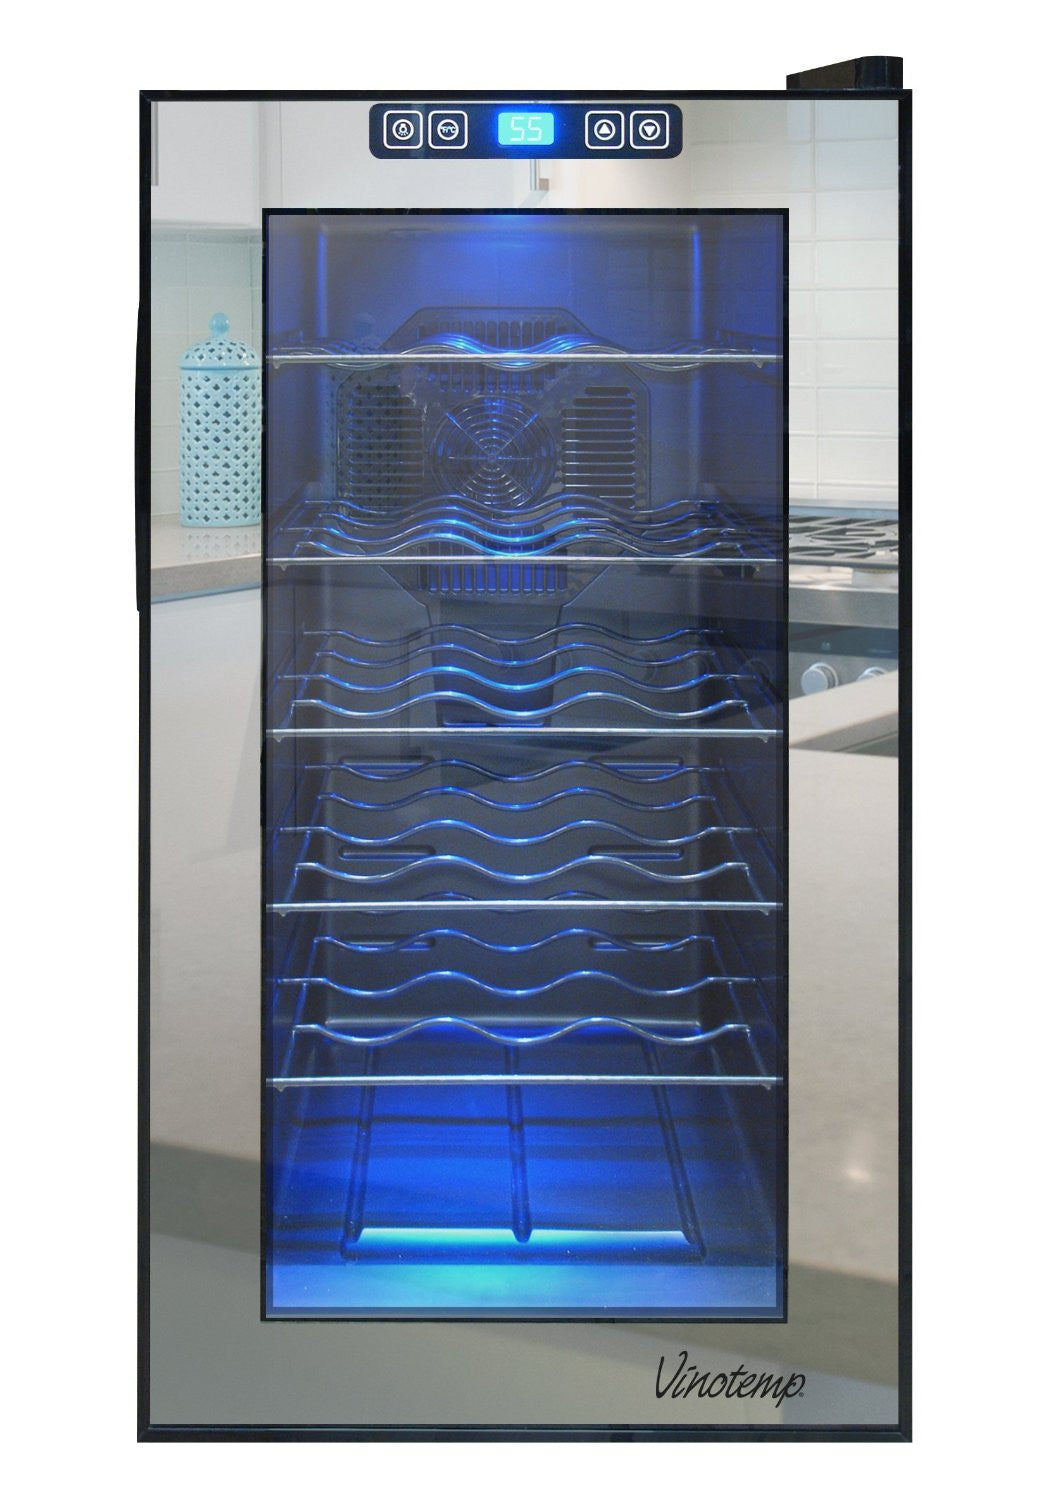 Vinotemp Vt-18tsbm 18-bottle Mirrored Thermoelectric Wine Cooler